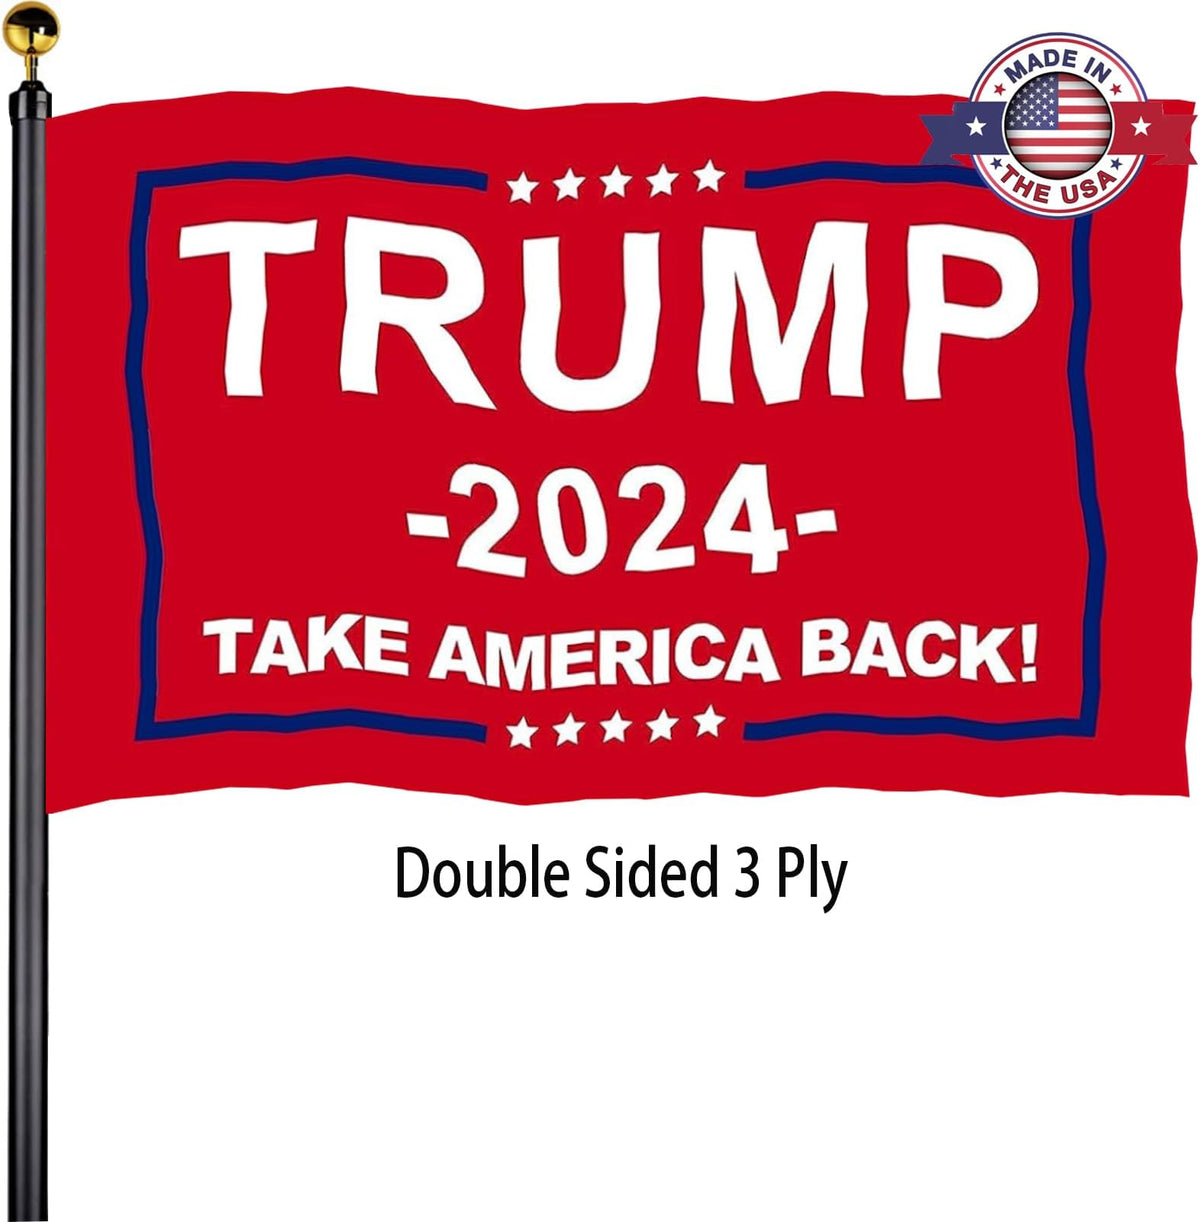 Trump 2024 Flags 3x5 Outdoor Made in USA-Double Sided 3 Ply Heavy Duty Red Take America Back Trump Flags Banner for Outside with 2 Brass Grommets UV protection Fade Resistant for Indoor Outdoor